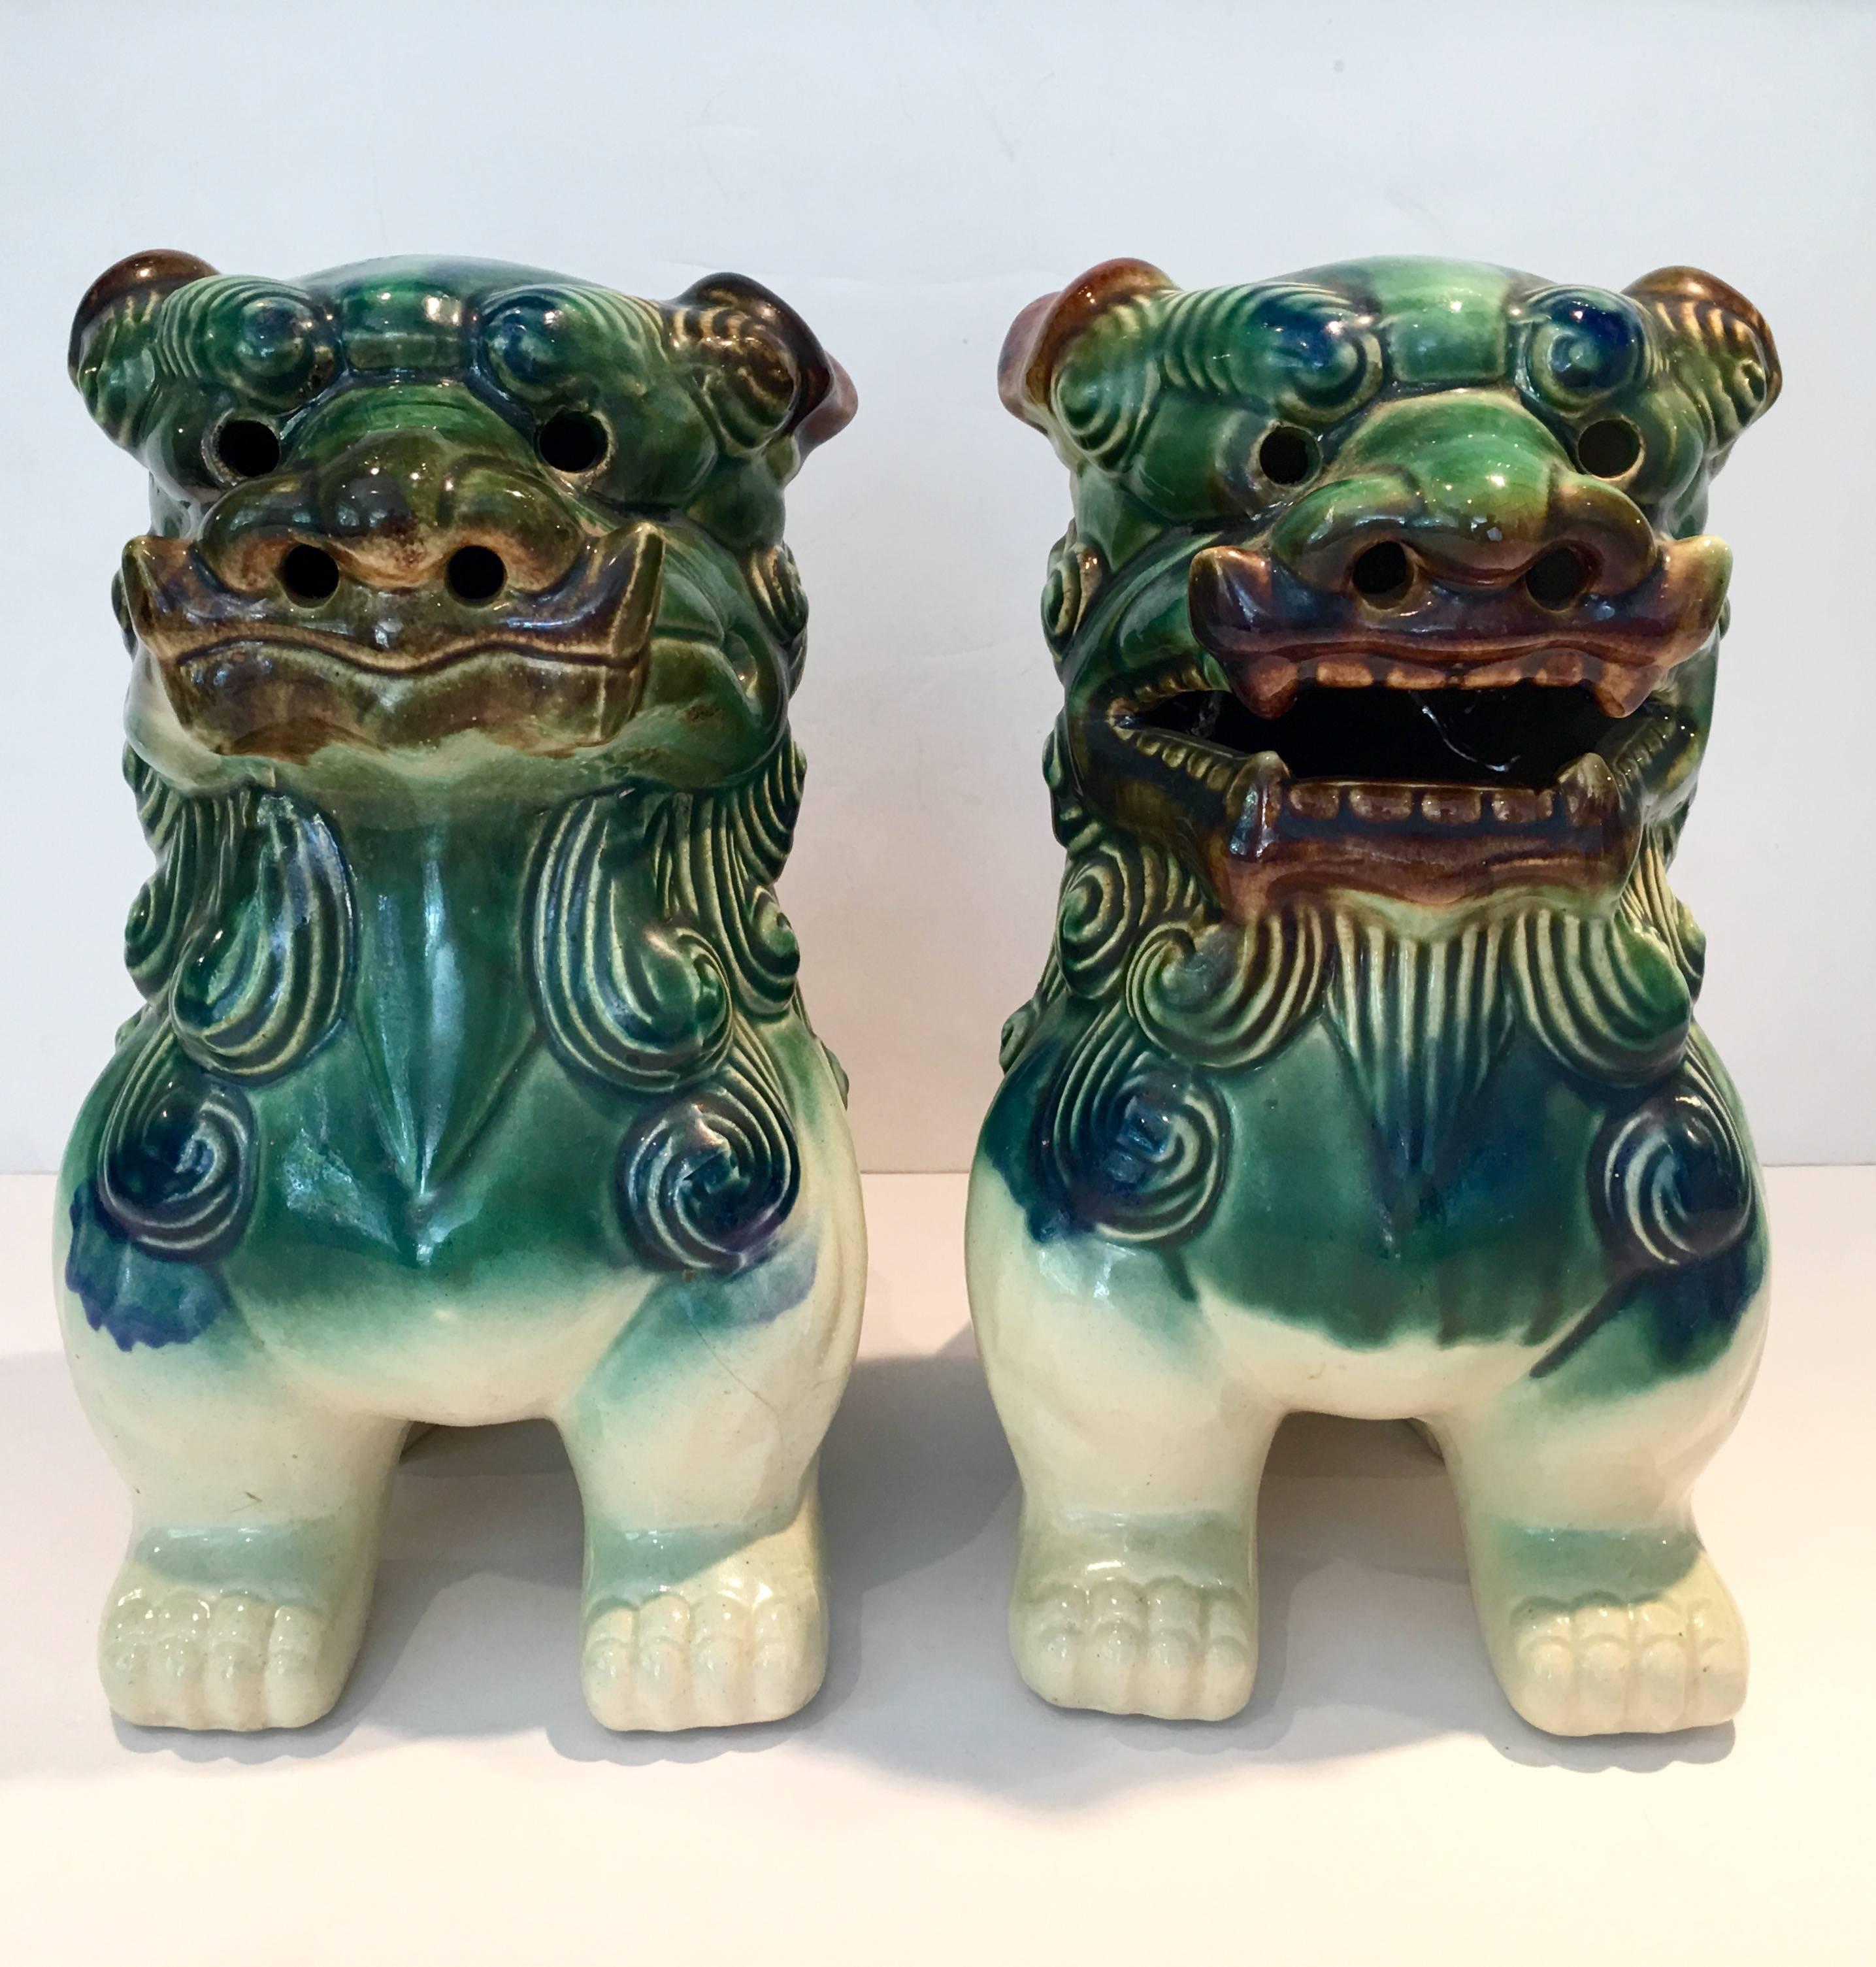 Chinese Export Vintage Pair of Chinese Ceramic Glaze Polychrome Foo Dogs